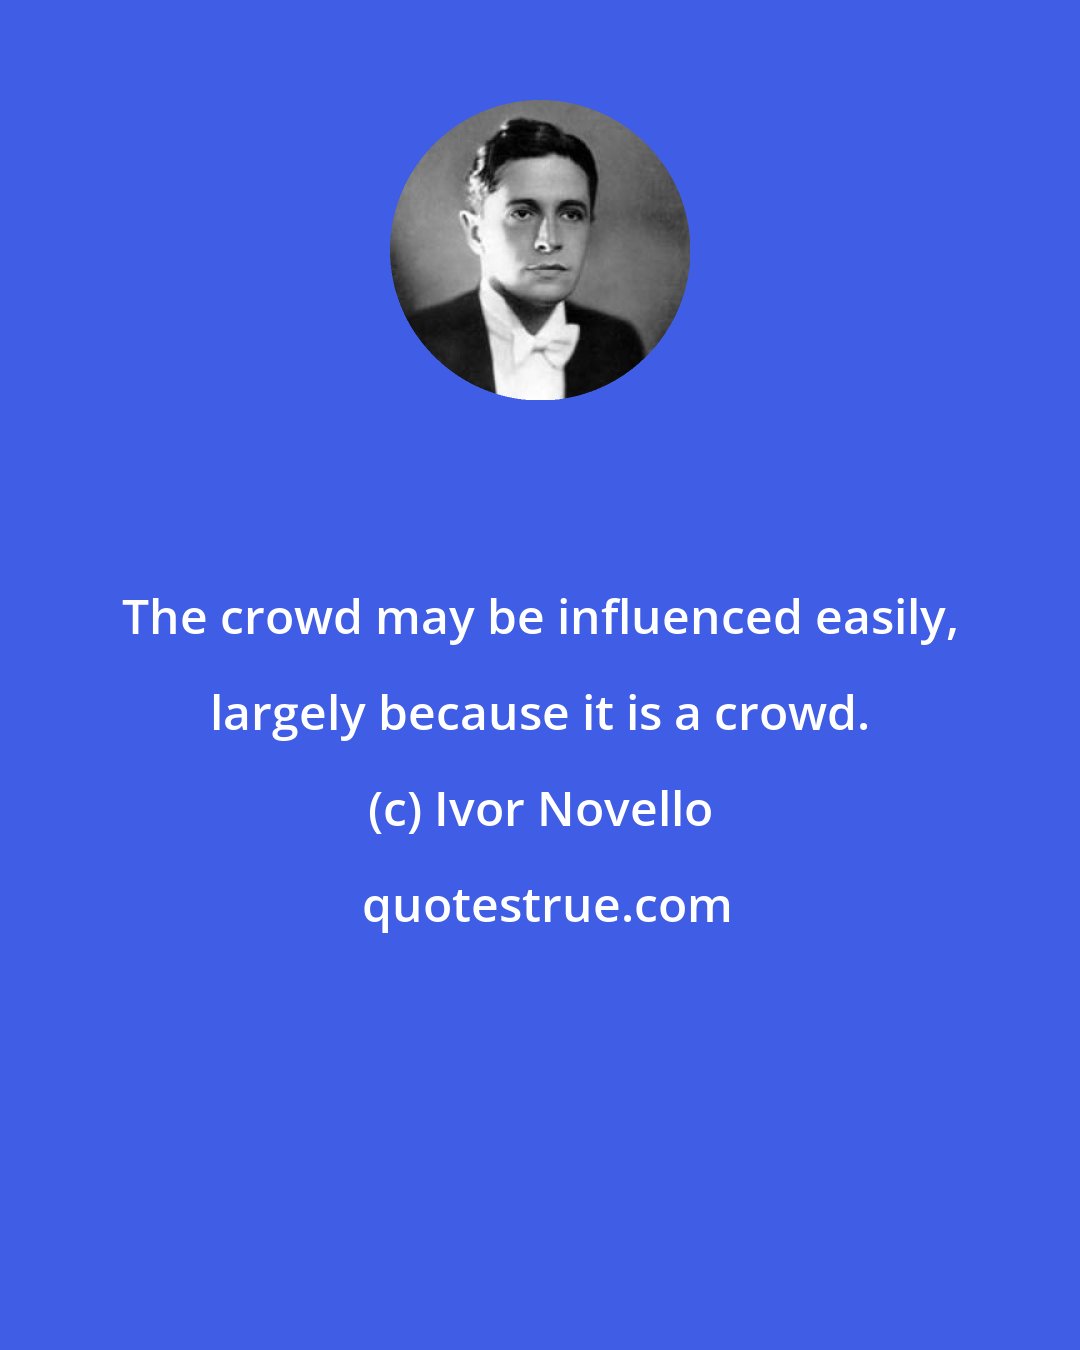 Ivor Novello: The crowd may be influenced easily, largely because it is a crowd.